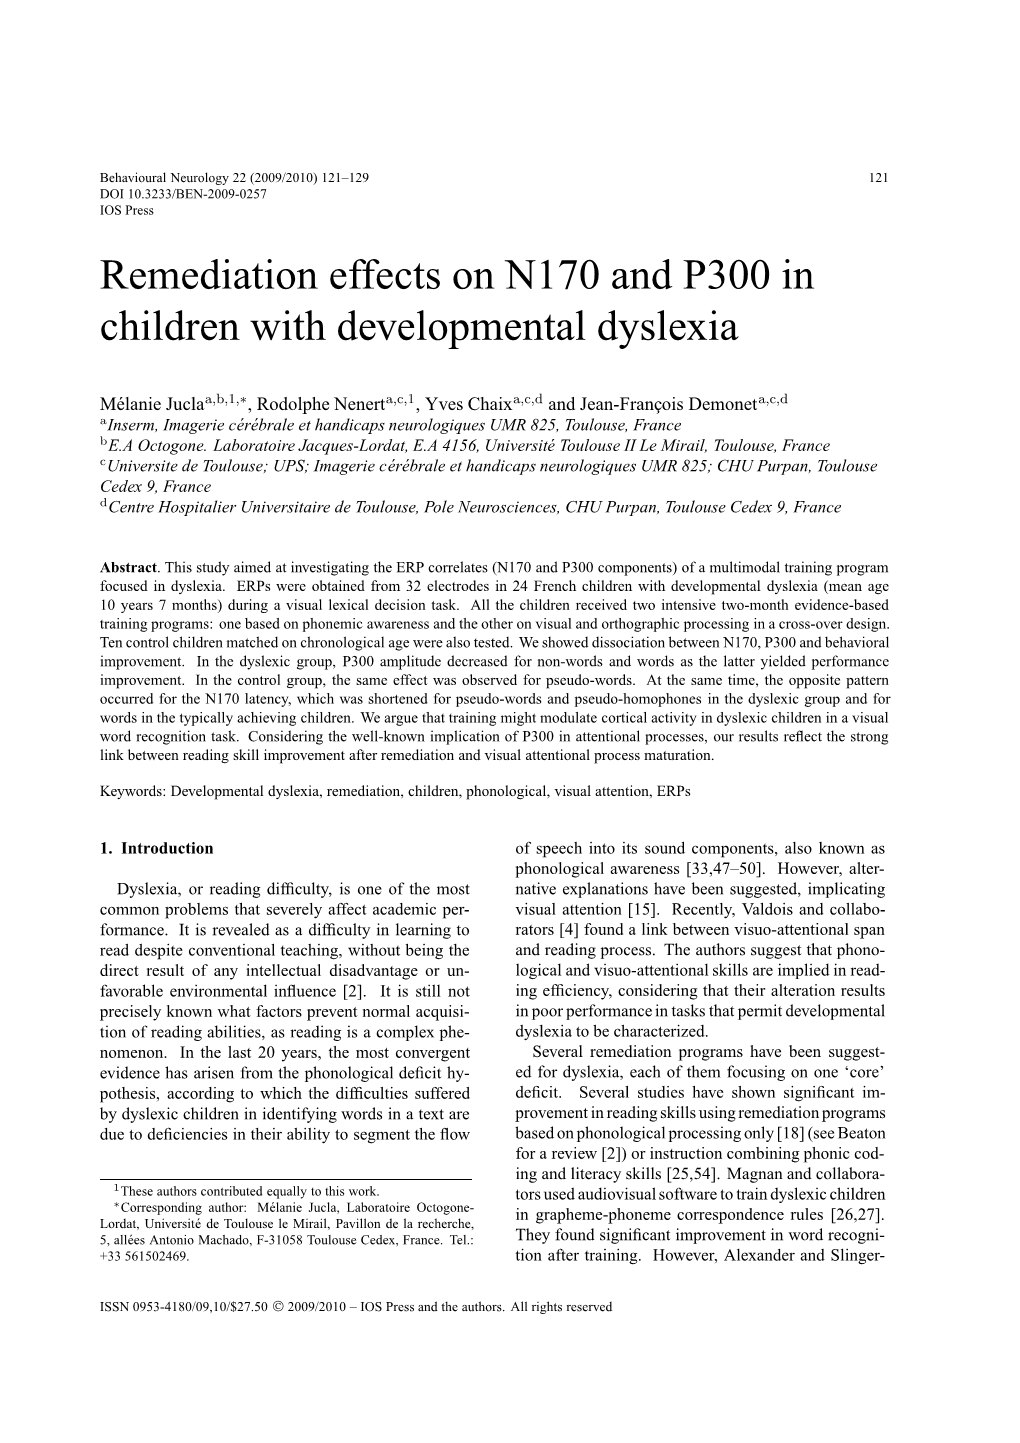 Remediation Effects on N170 and P300 in Children with Developmental Dyslexia